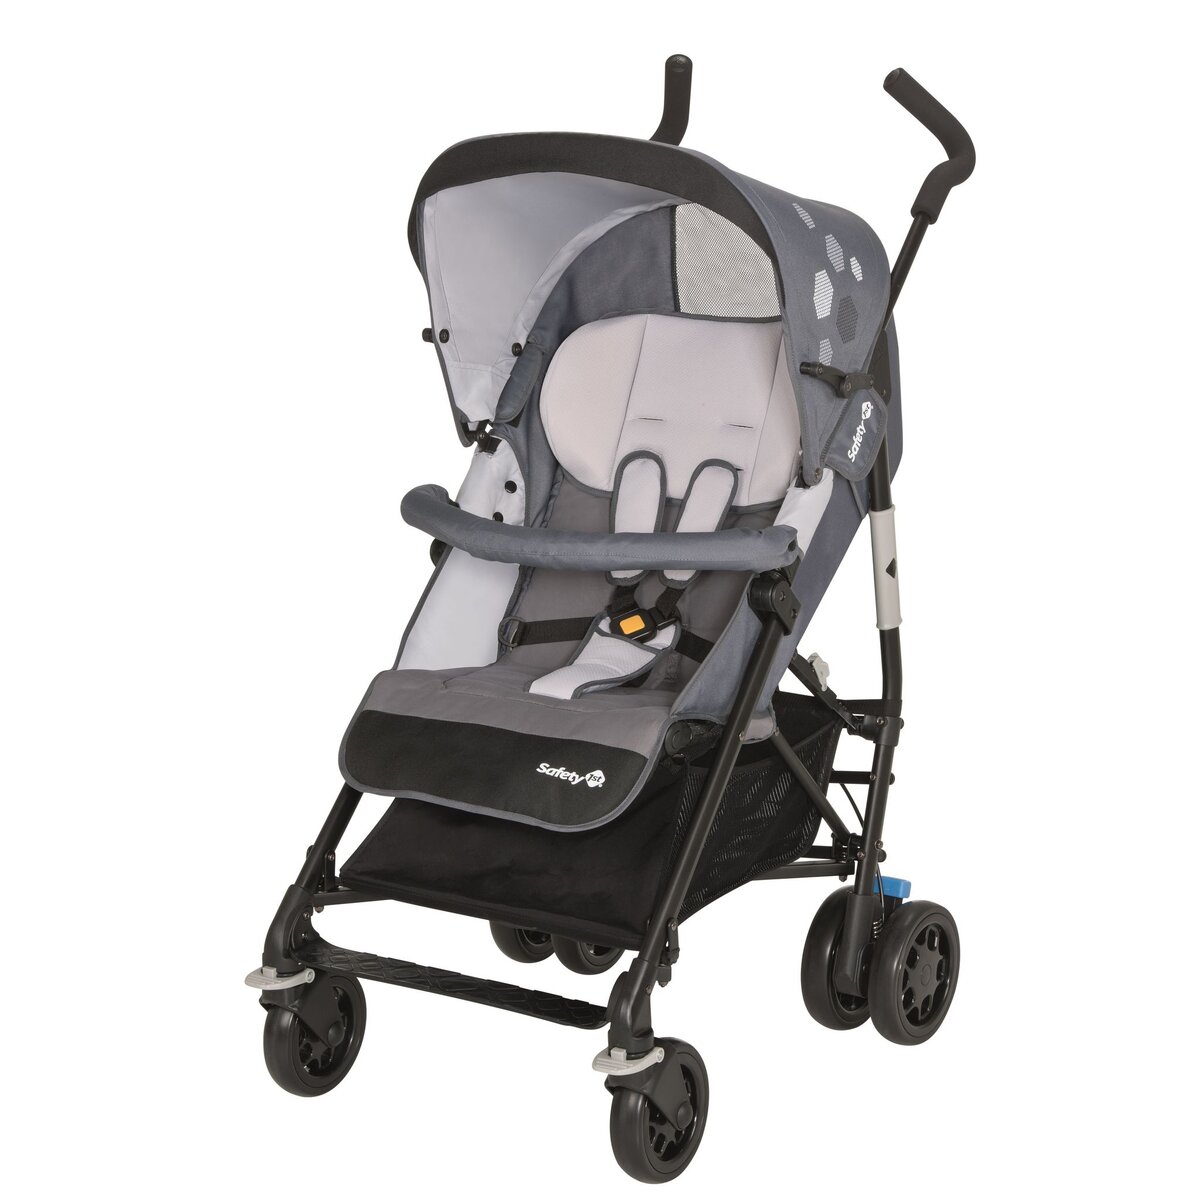 SAFETY FIRST Poussette canne compacte, easy way urban poetry pas cher 